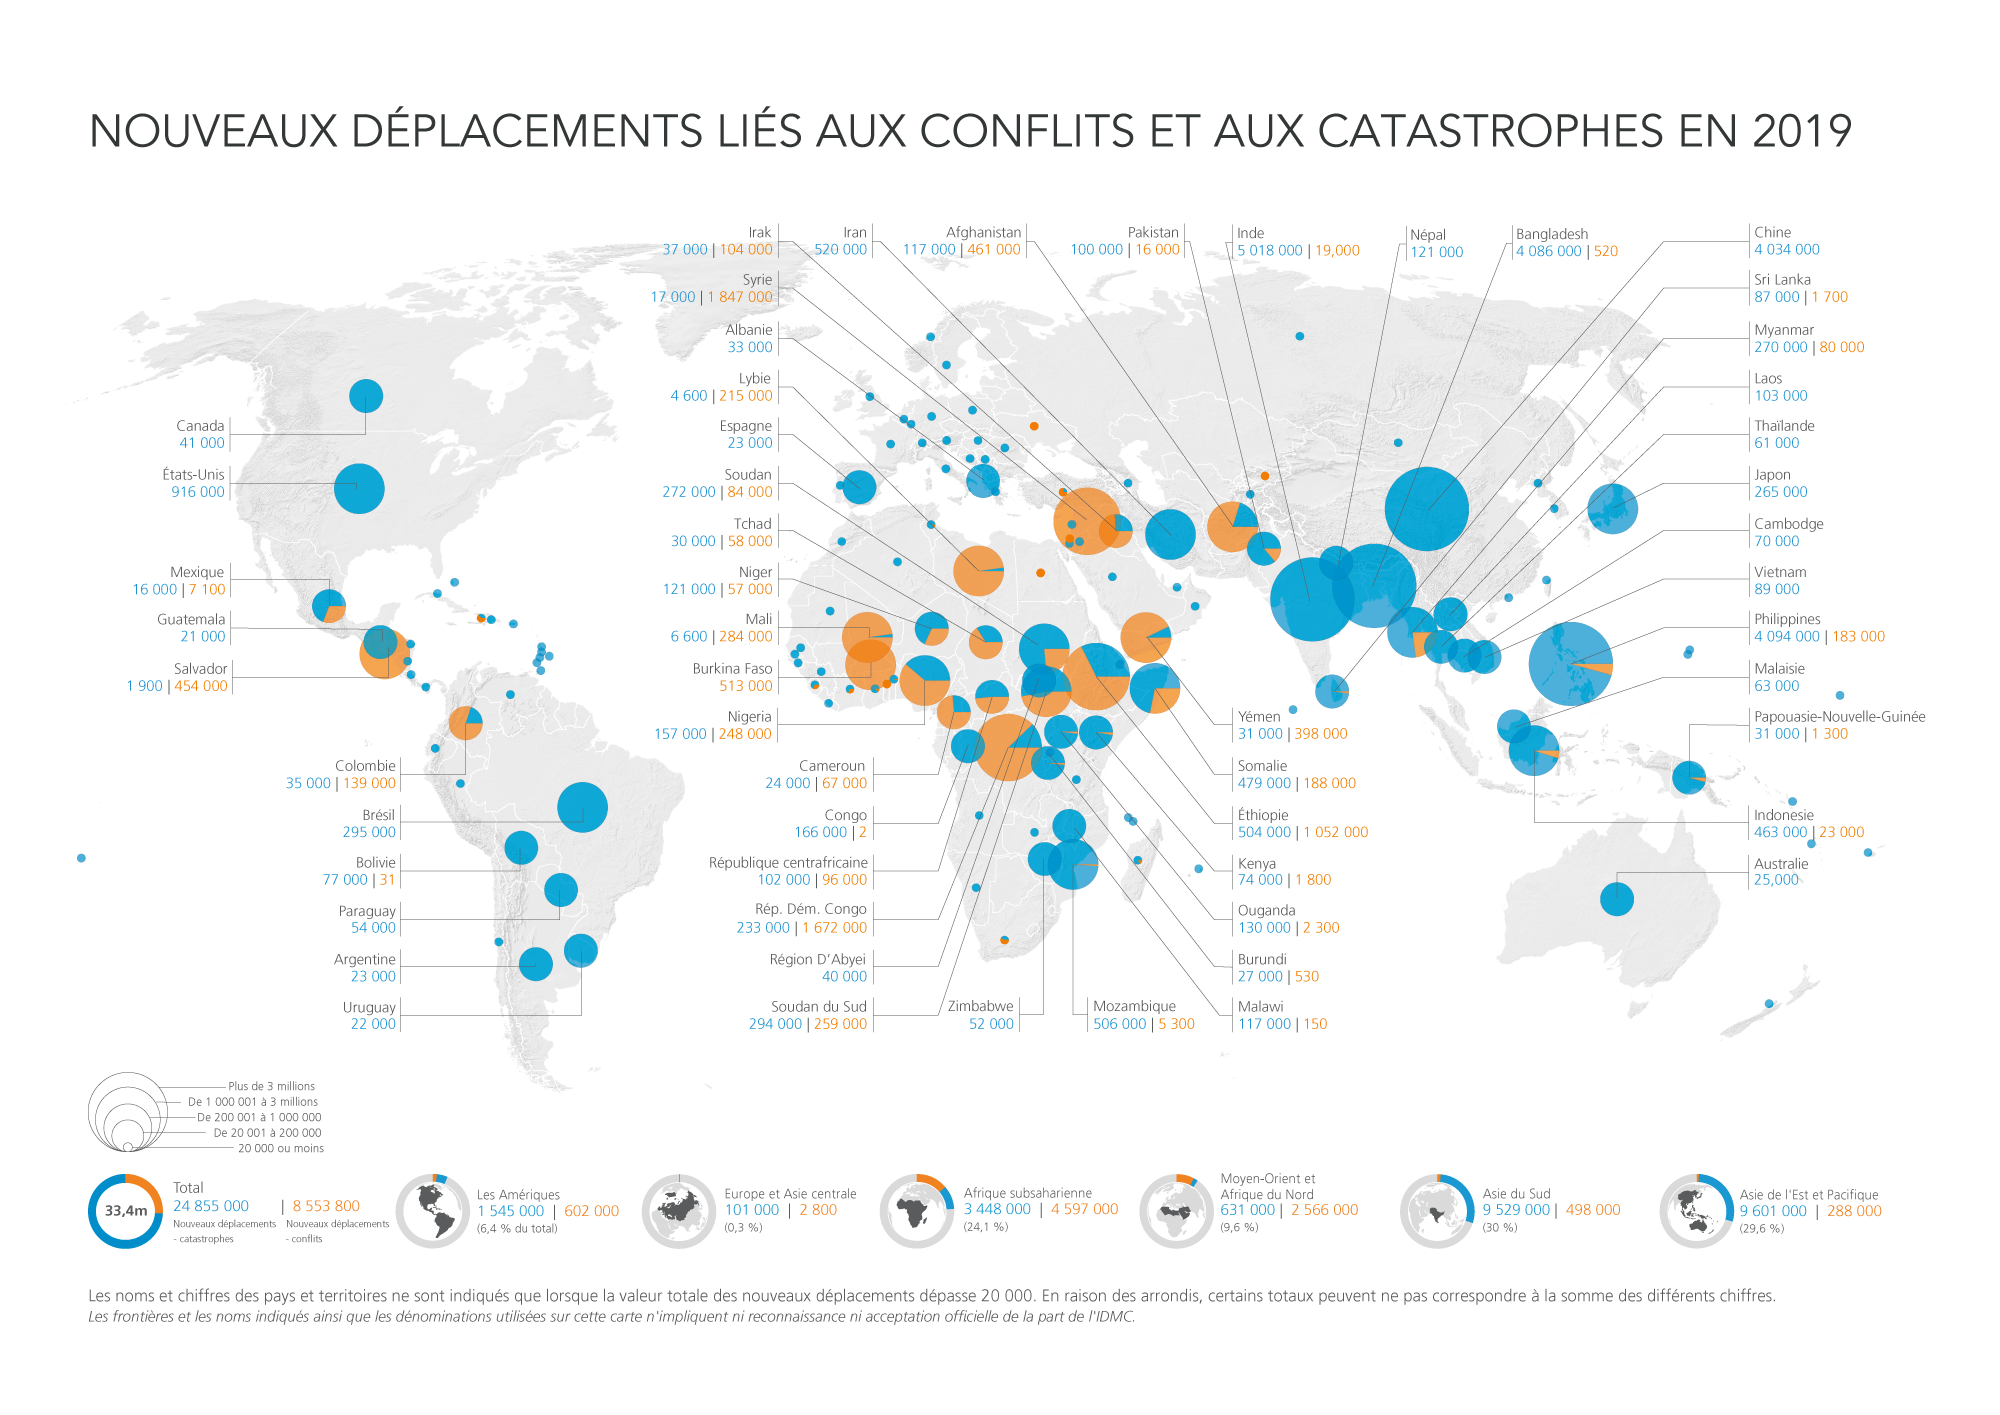 World map showing new displacement by conflict and disasters in 2019